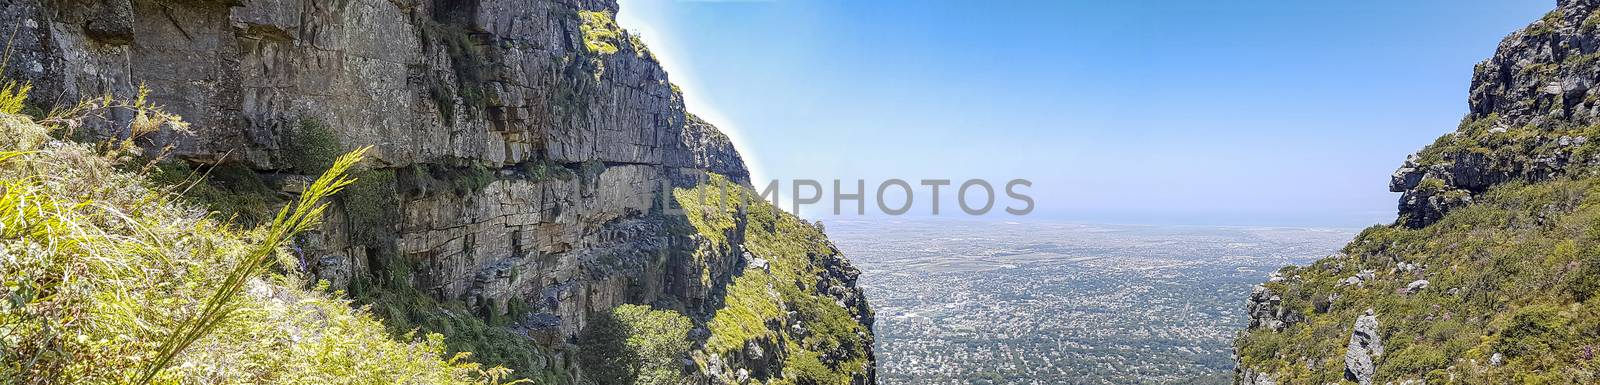 Amazing view from Table Mountain National Park. by Arkadij